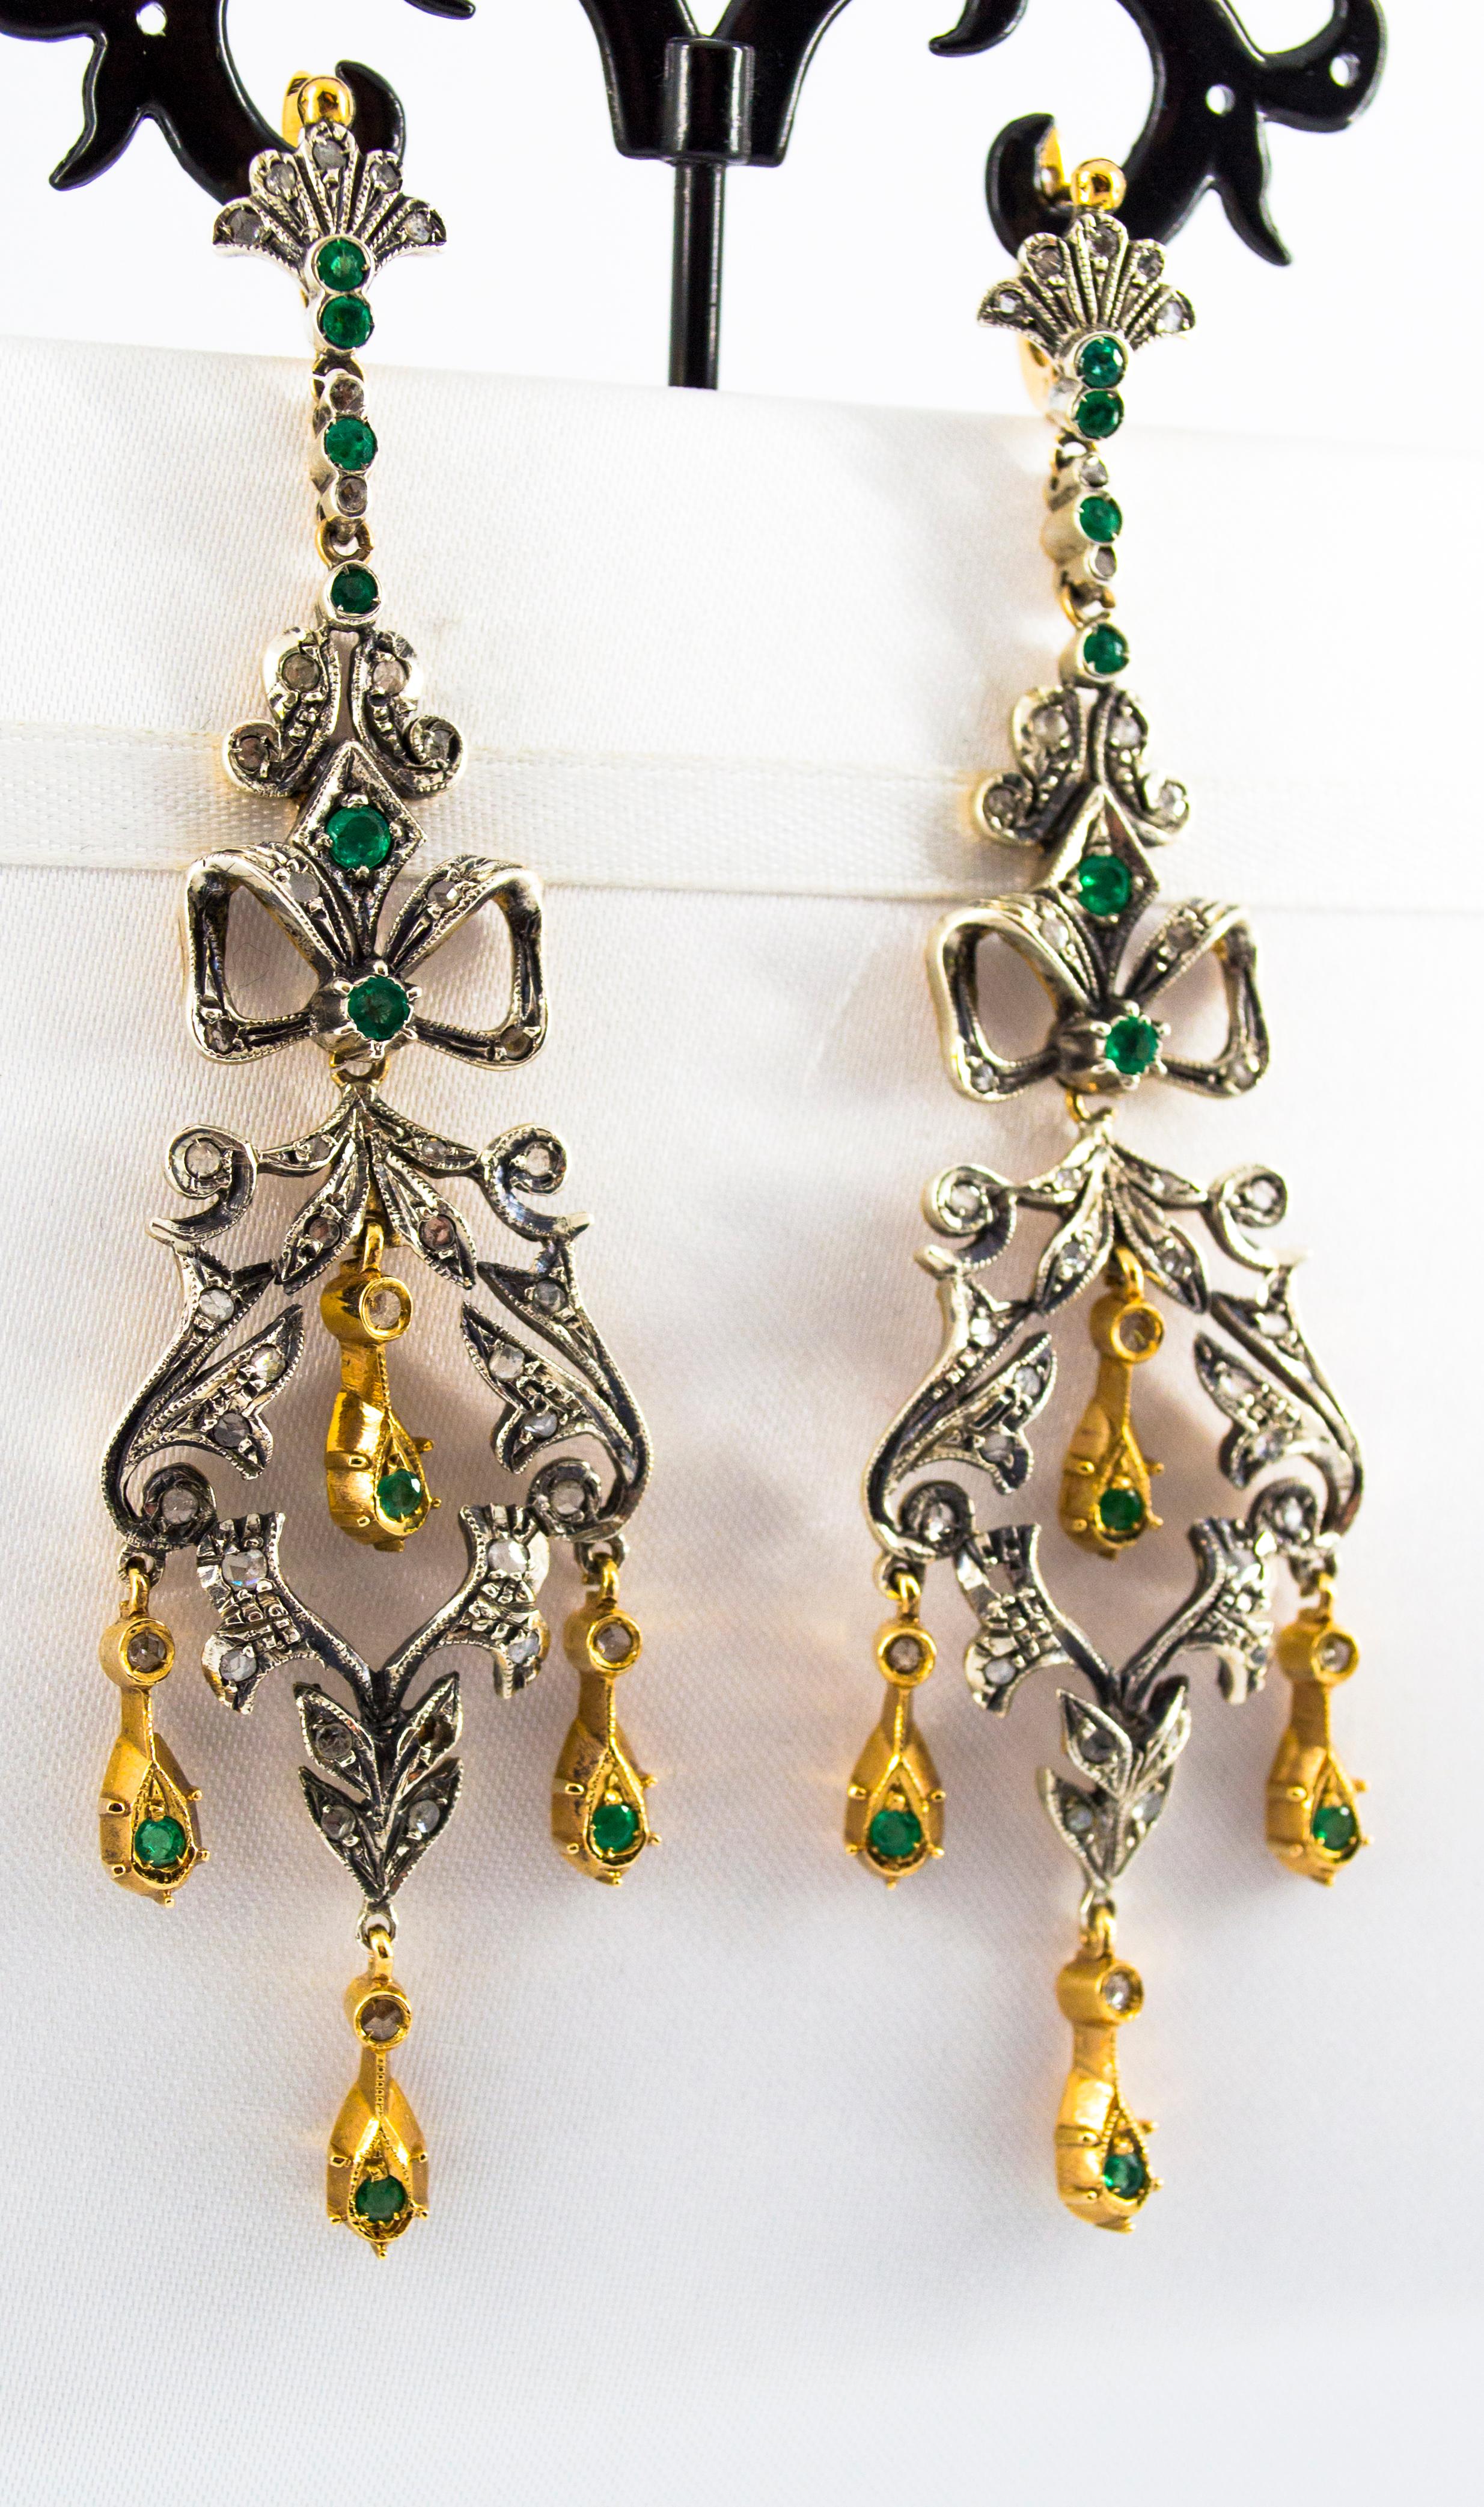 These Earrings are made of 9K Yellow Gold and Sterling Silver.
These Earrings have 0.60 Carats of White Diamonds.
These Earrings have 1.10 Carats of Emeralds.
All our Earrings have pins for pierced ears but we can change the closure and make any of